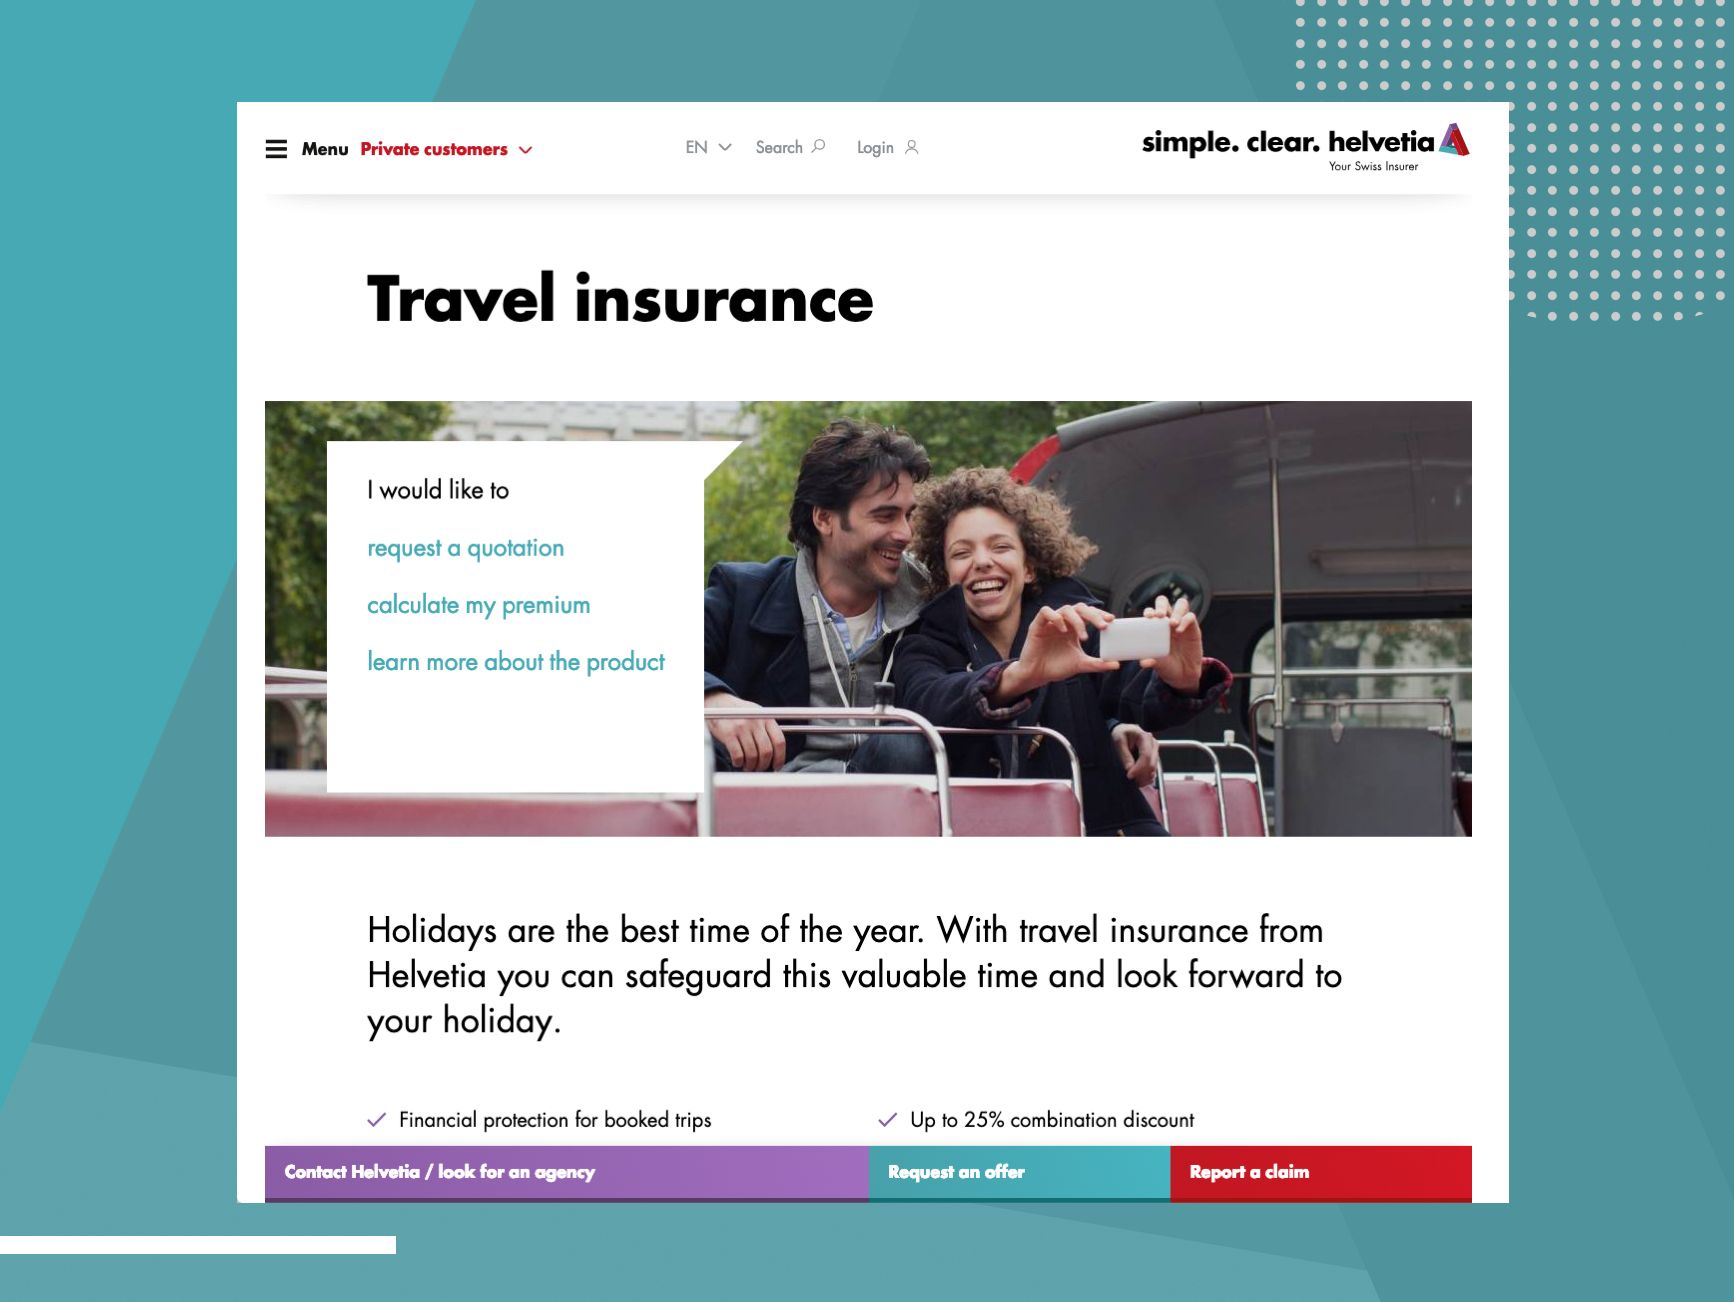 Helvetia website travel insurance page